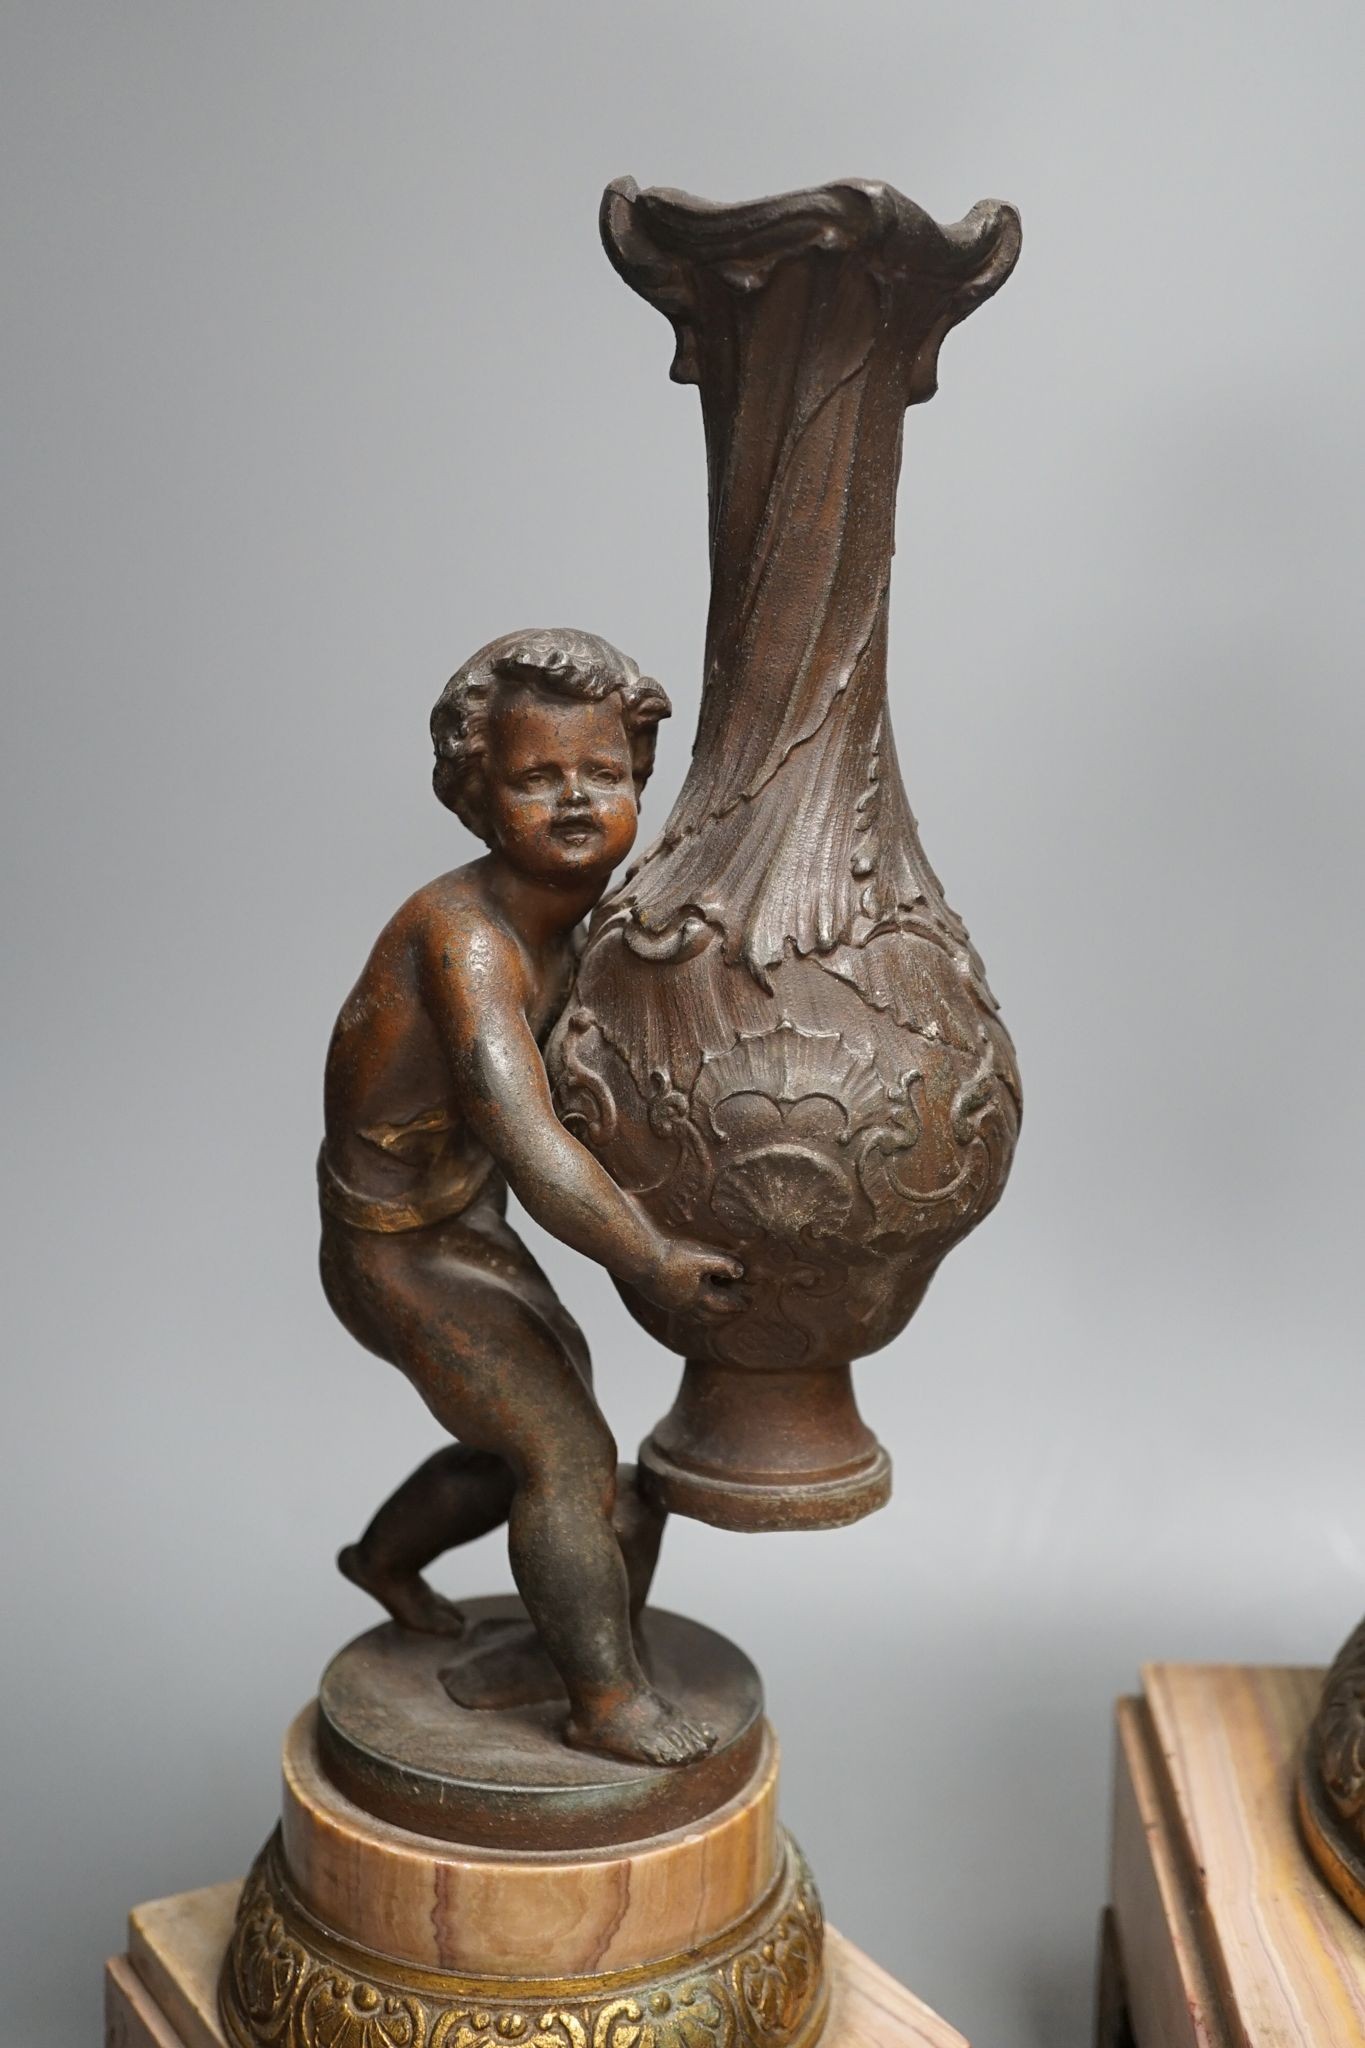 A spelter and marble figural mantel clock and a matching vase 47cm